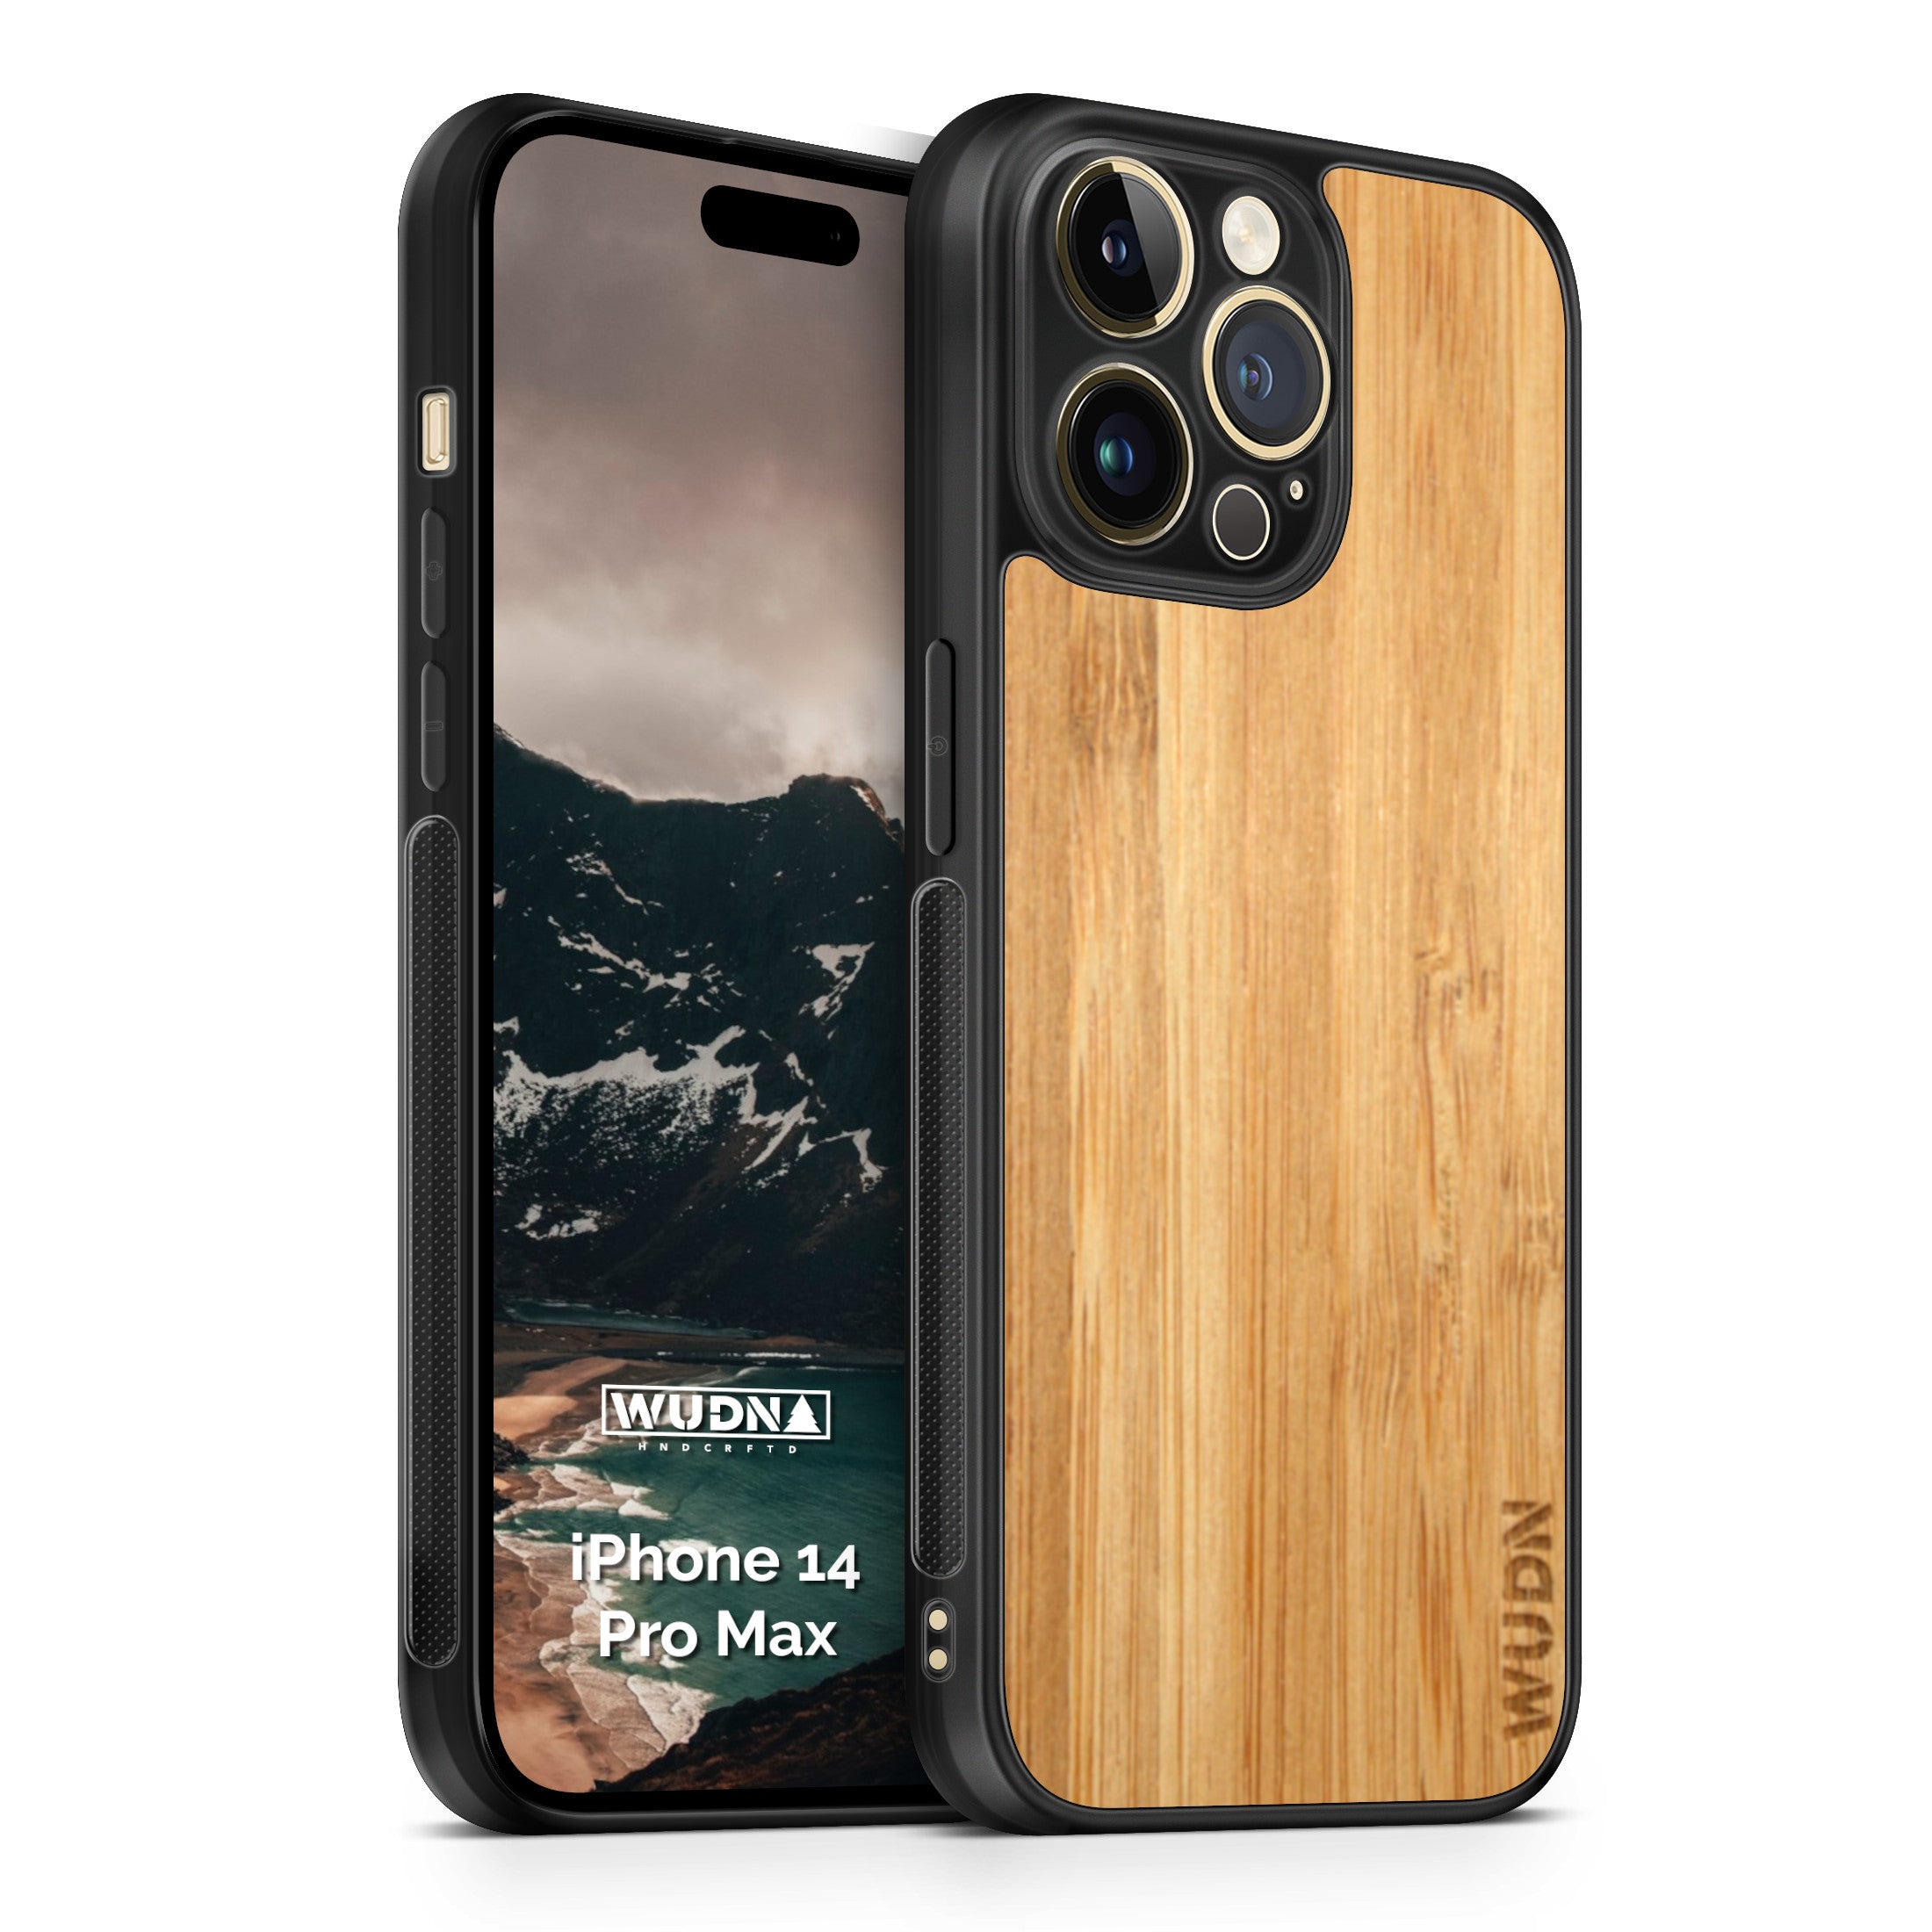 Slim Wooden iPhone Case (Carmalized Bamboo)